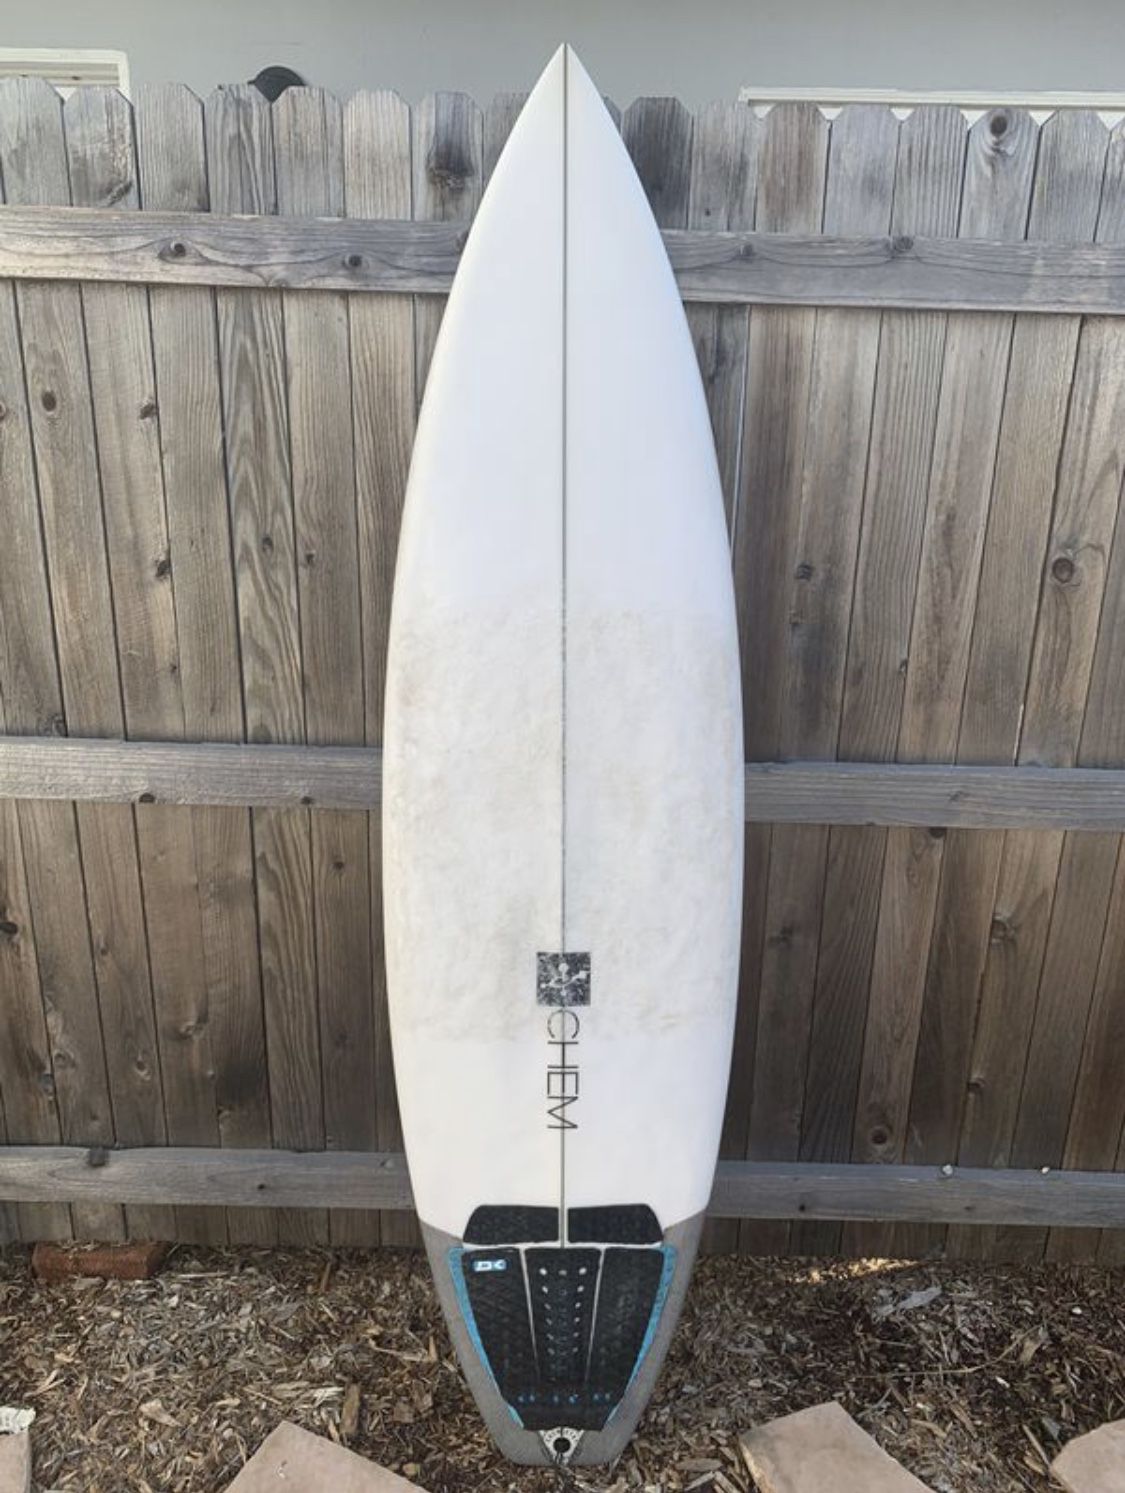 6’ - 6” Chemistry Surfboard, good shape and watertight 37.9L